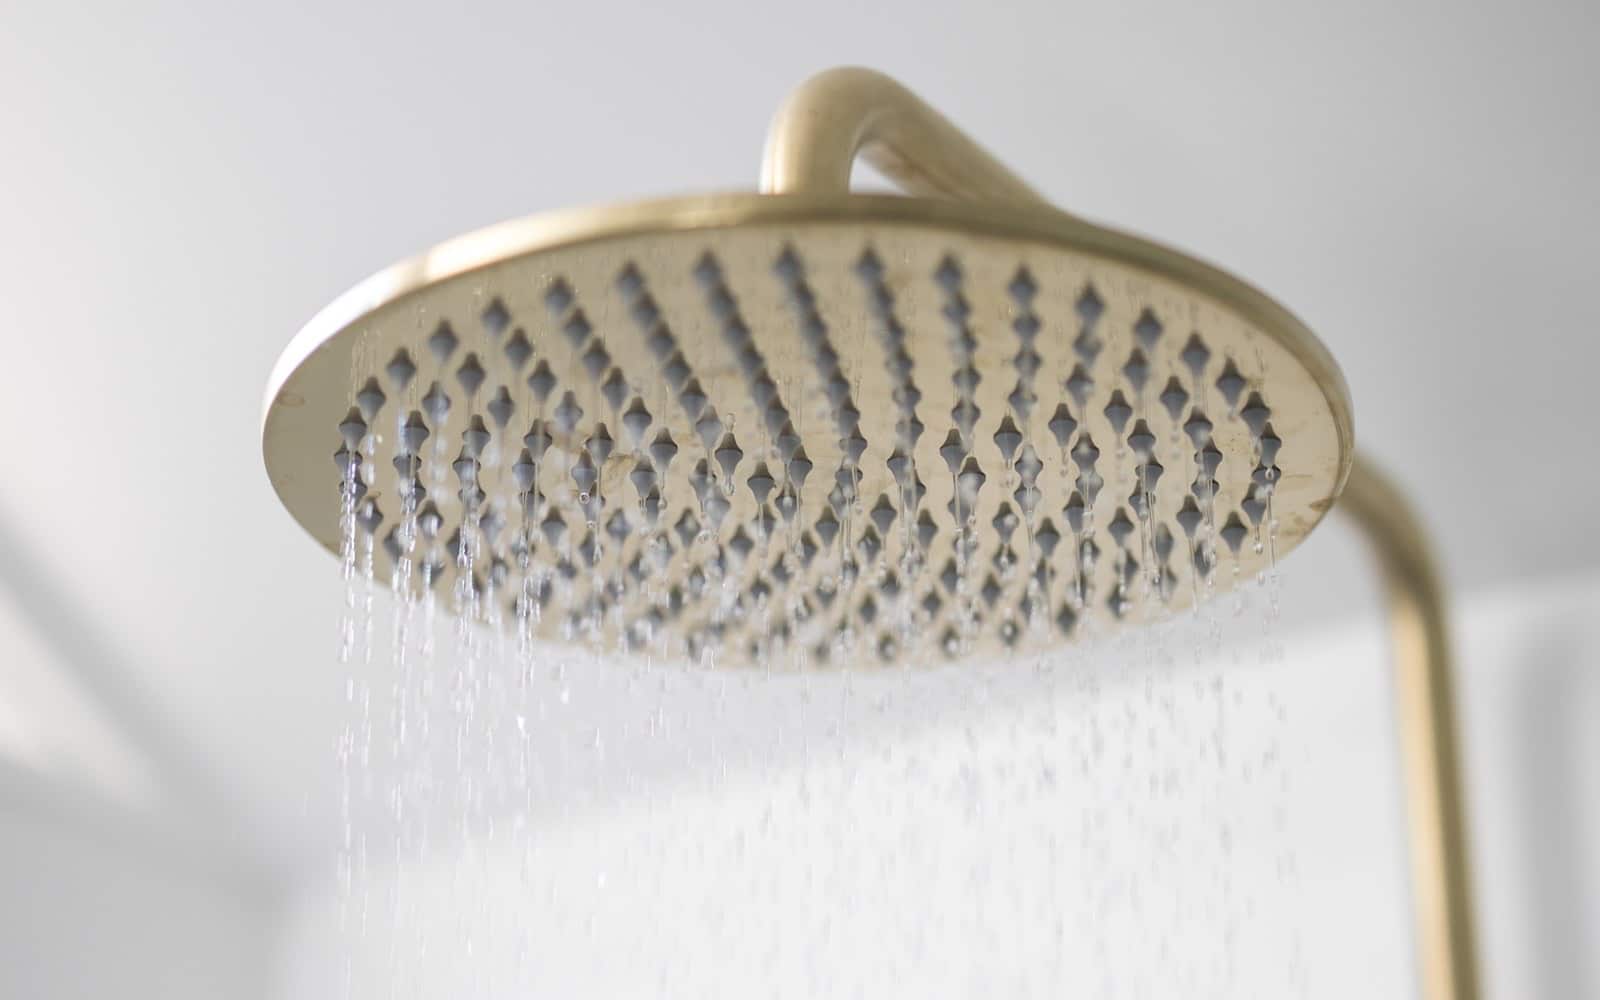 Rather than show you us in the shower, here's a picture of a shower head.